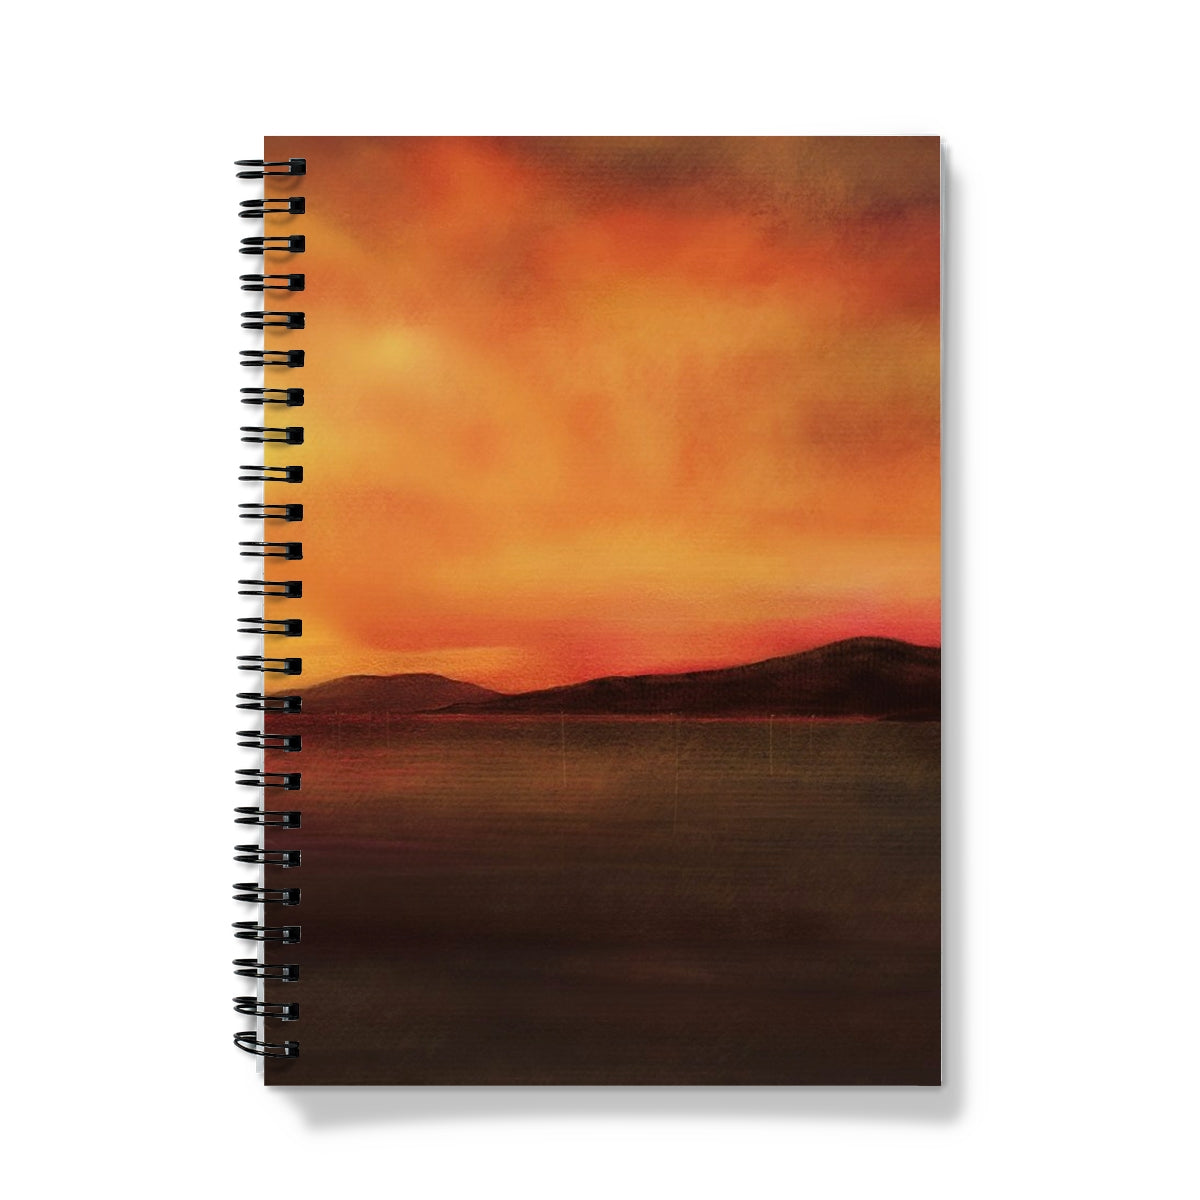 Harris Sunset Art Gifts Notebook-Journals & Notebooks-Hebridean Islands Art Gallery-A5-Lined-Paintings, Prints, Homeware, Art Gifts From Scotland By Scottish Artist Kevin Hunter